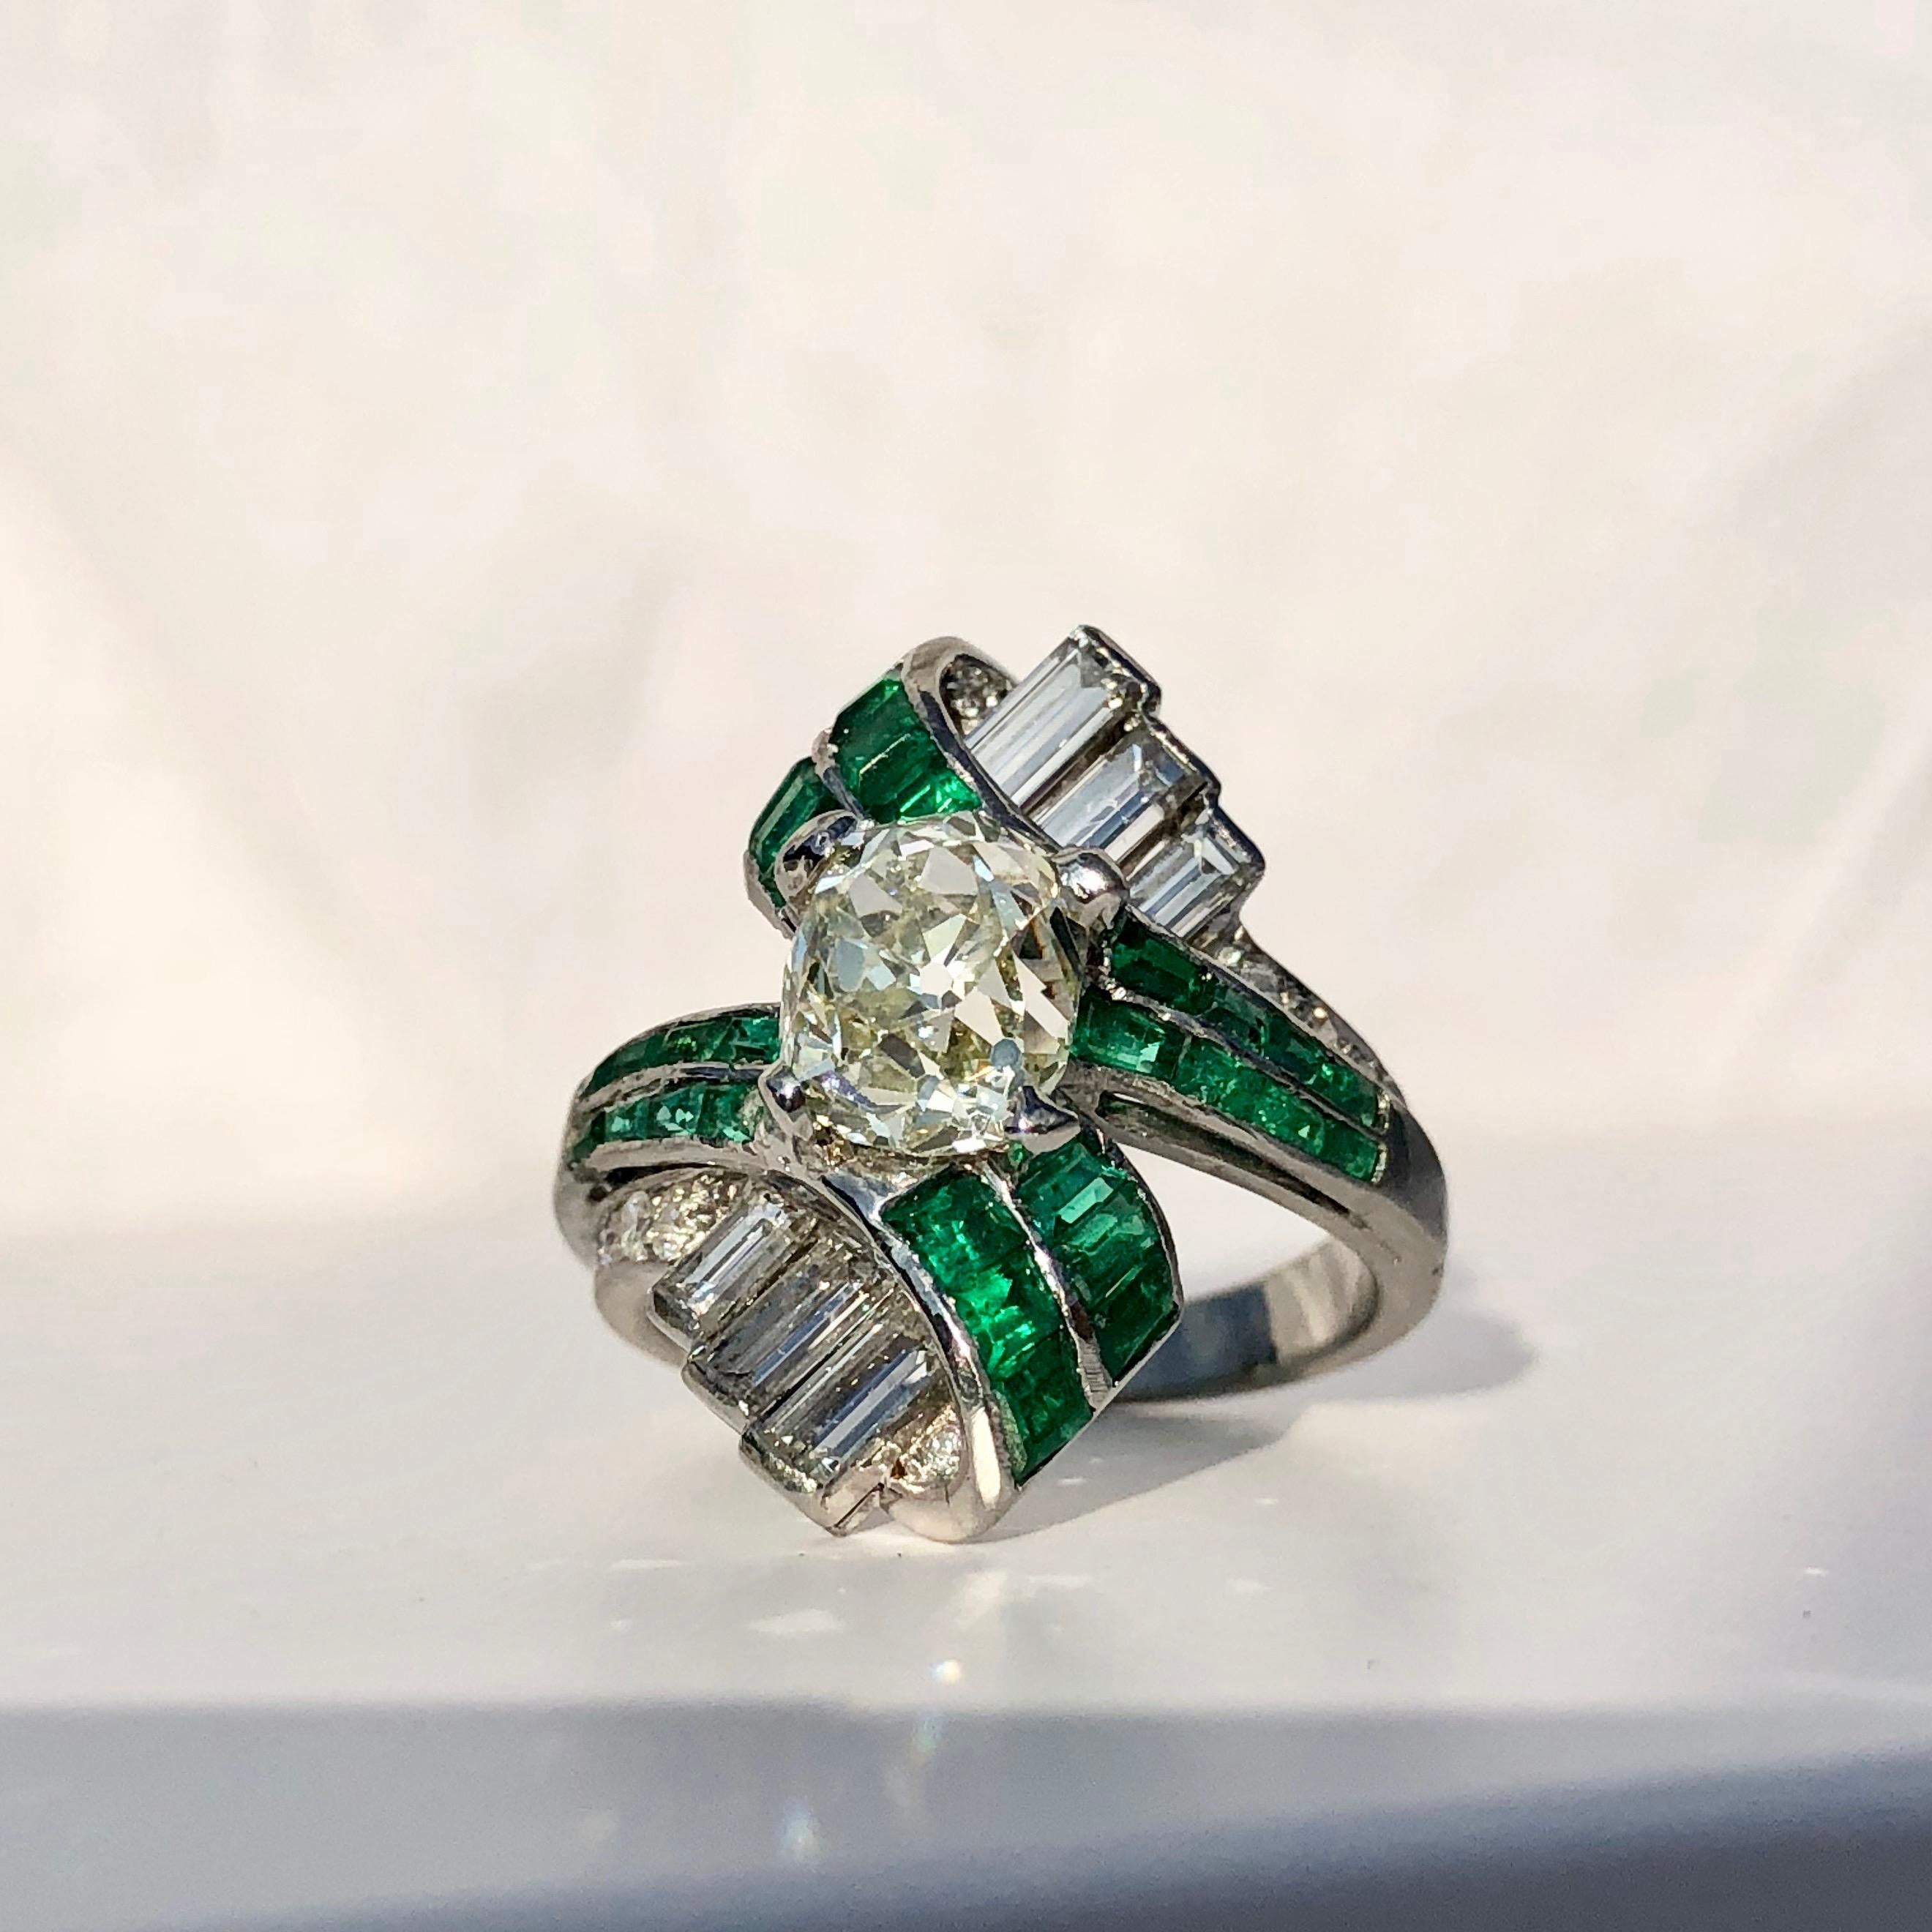 Antique Baguette Emerald And Old Cut Diamond Art Deco Cocktail Engagement Ring  im Angebot 2